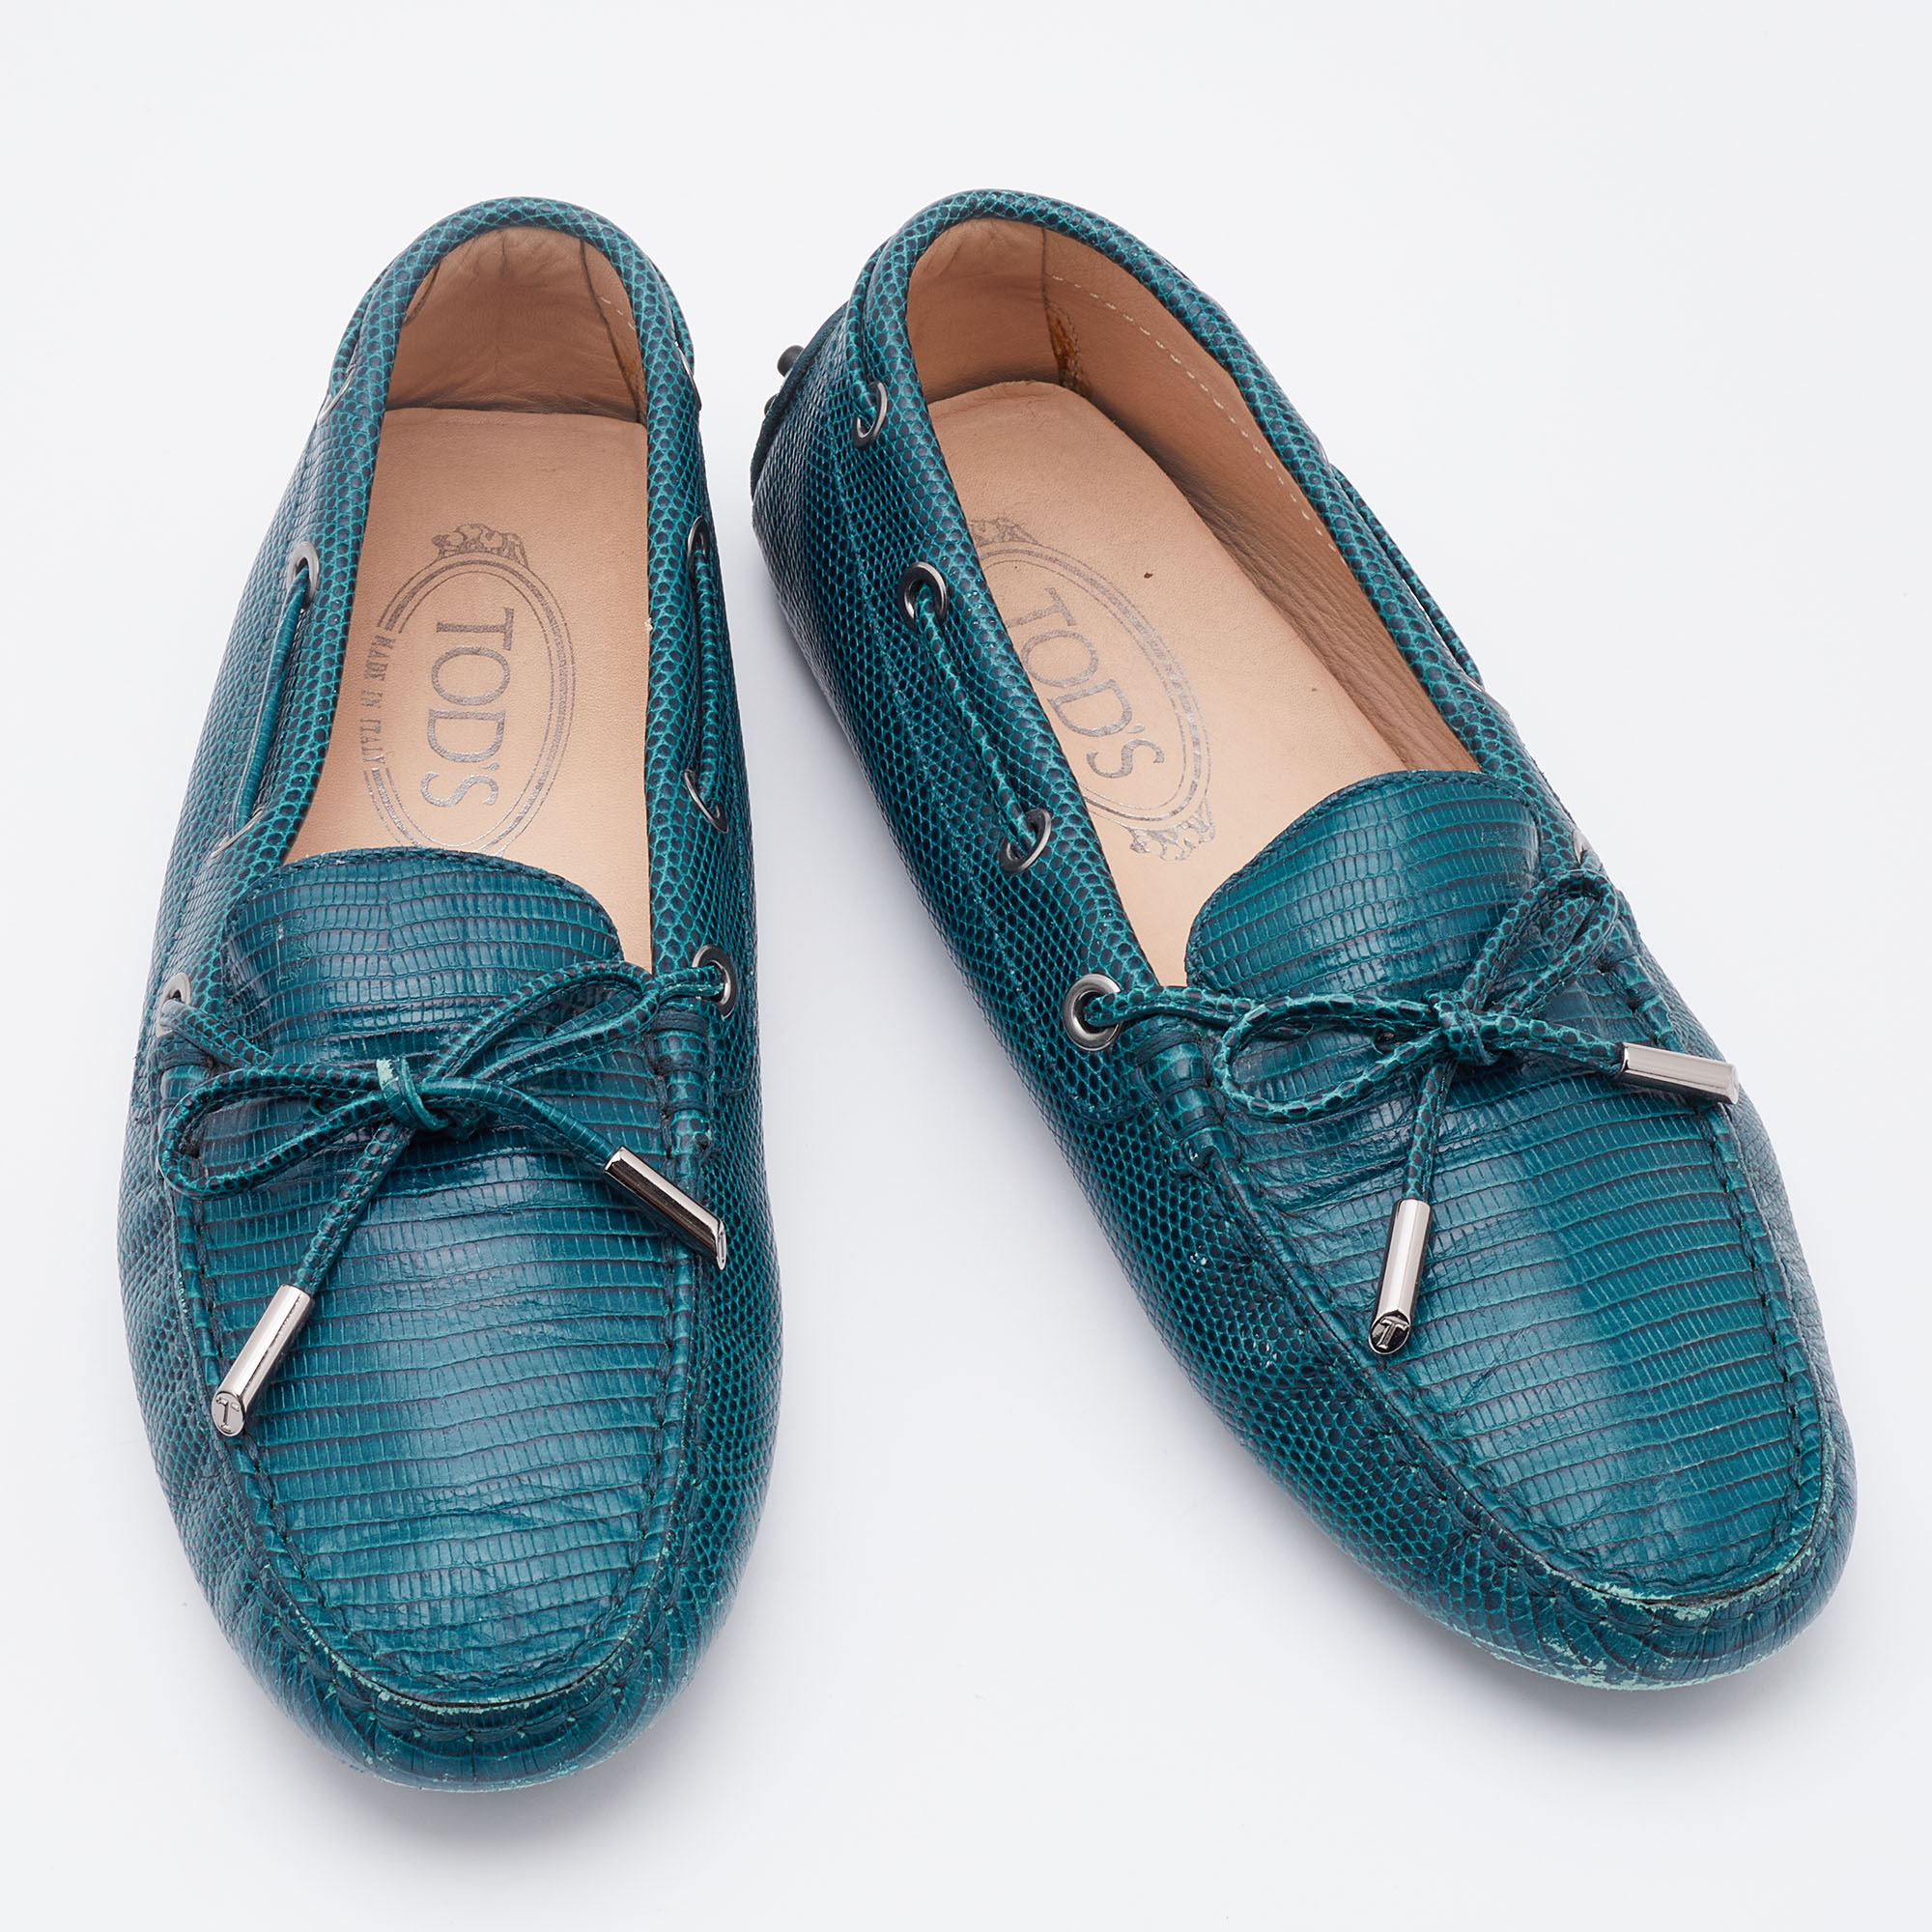 Tod's Teal Blue Lizard Embossed Leather Bow Slip On Loafers Size 37.5